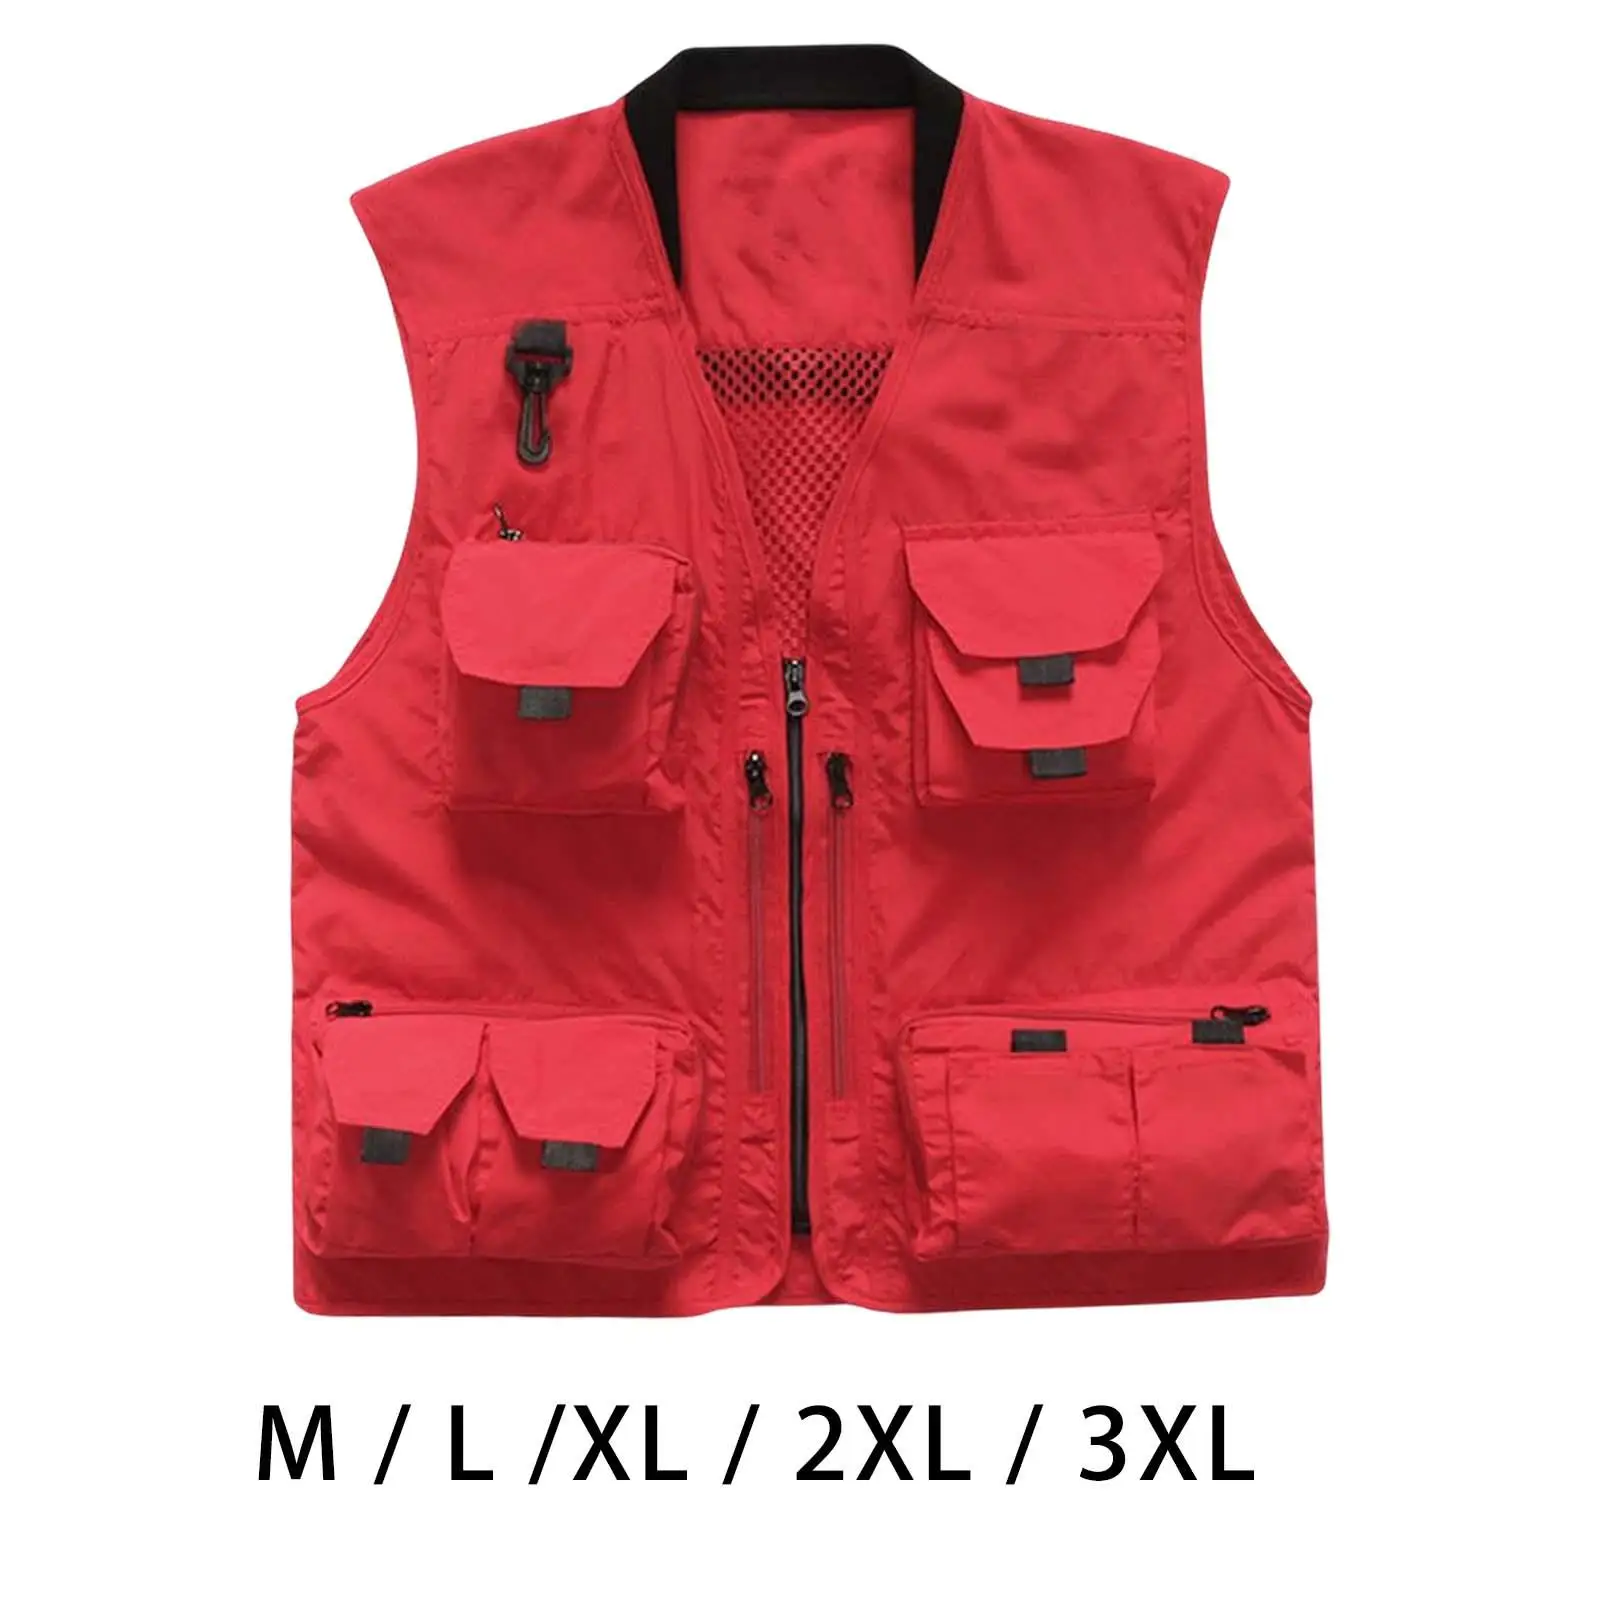 Casual Fishing Vest Costume Clothes with Pockets Waistcoat Fishermen Photography Mens Jacket for Climbing Hiking Work Sports